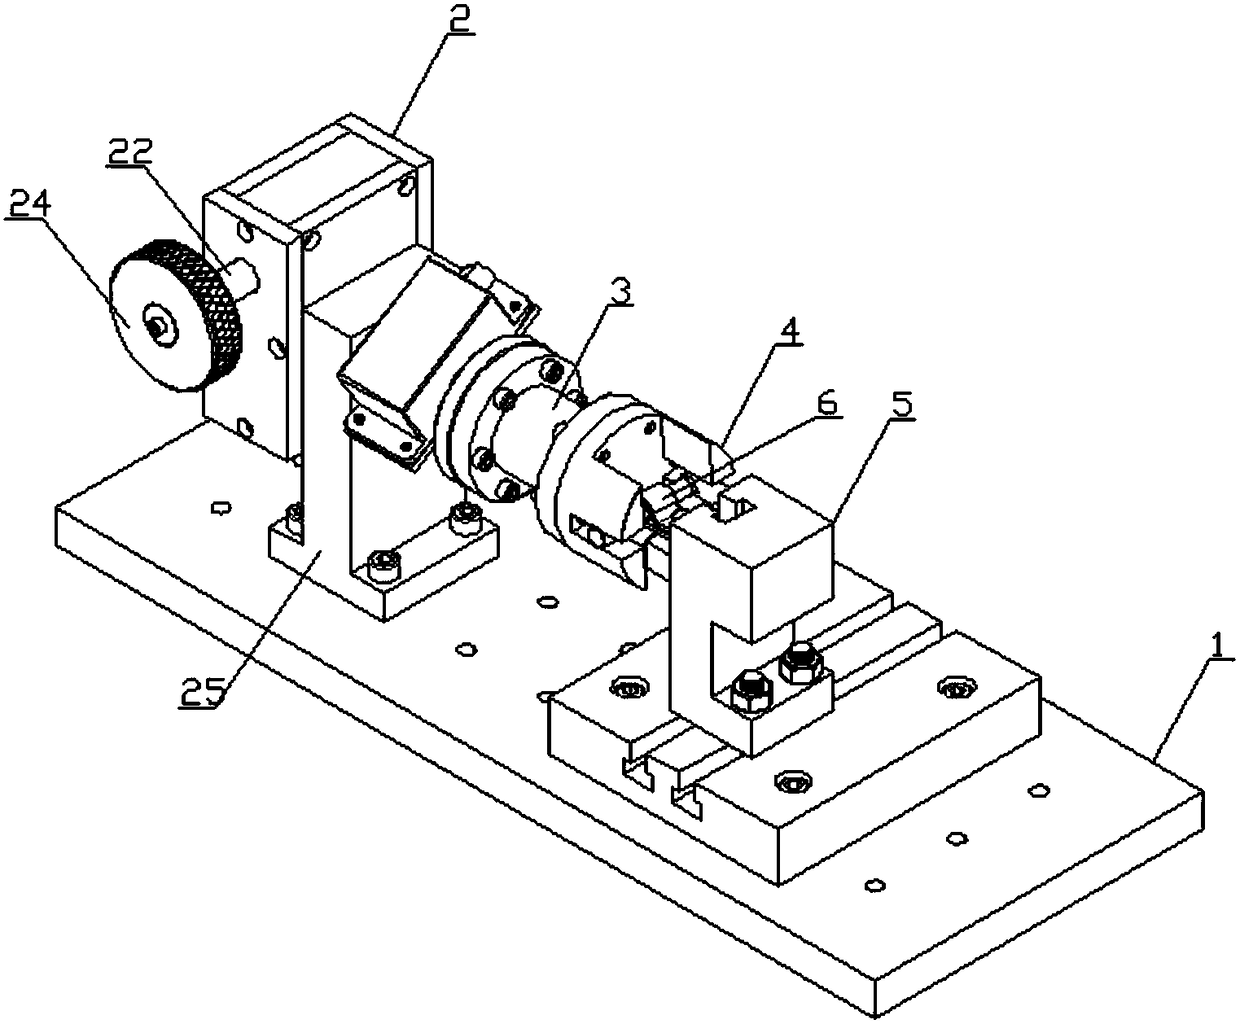 Accurate measuring device for angular rigidity of aero-engine clamp